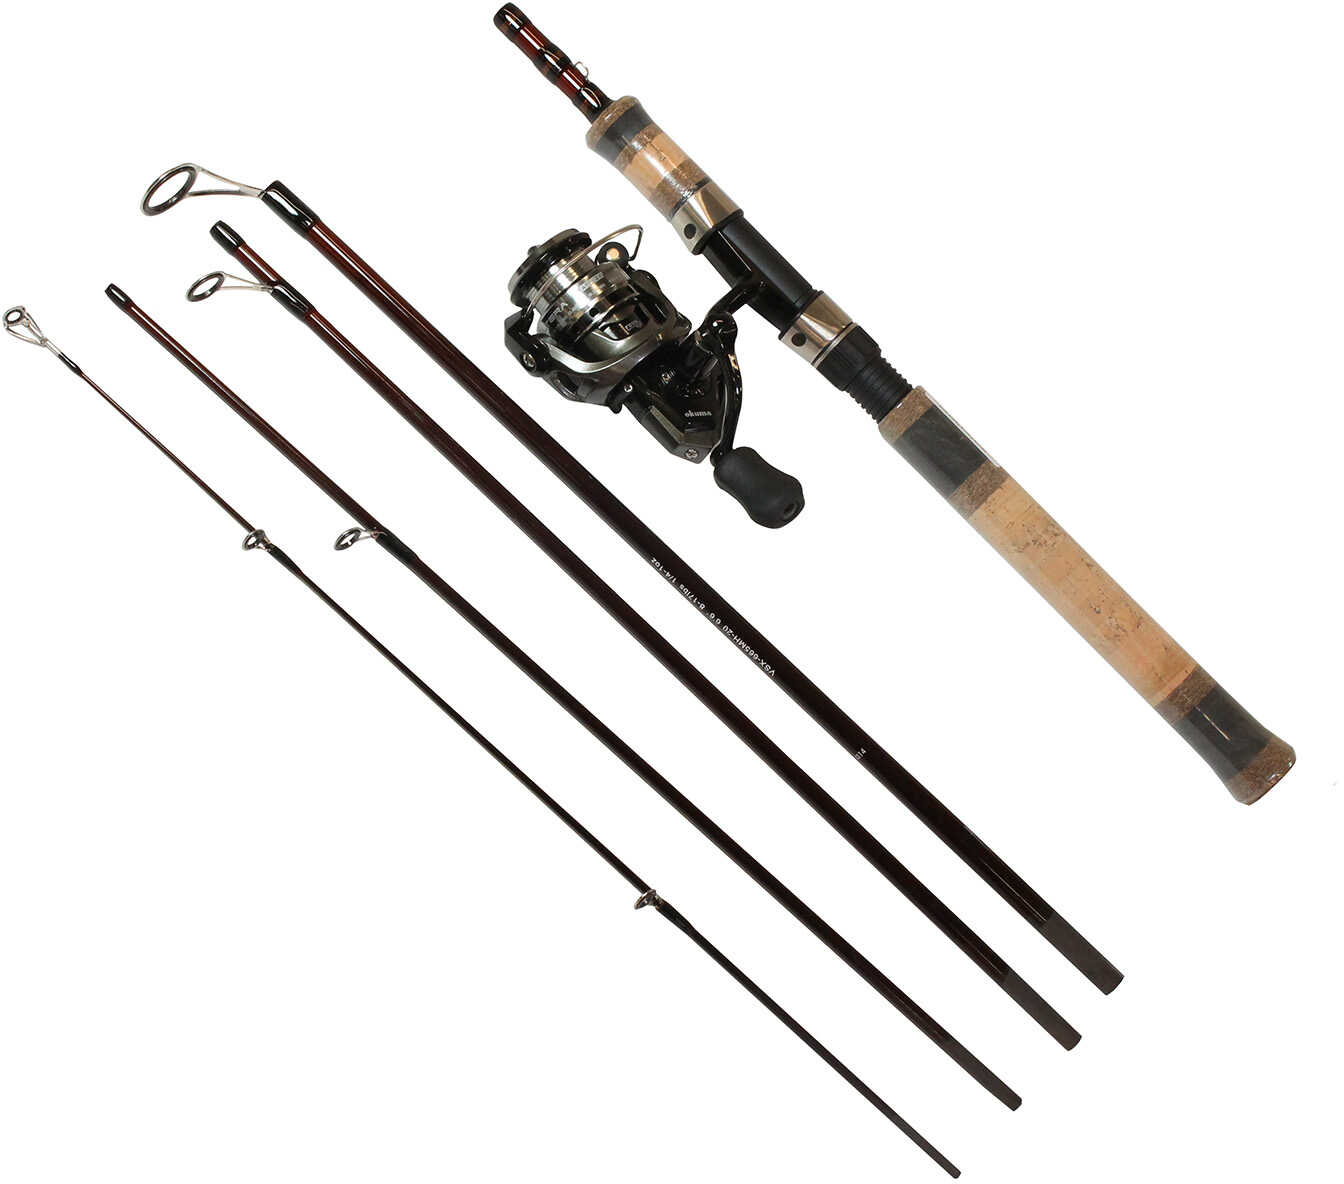 Okuma Voyager Select 5 Piece Spinning Combo 20 4.8:1 Gear Ratio 2-6 lb Line Rate 1/32-3/8 oz Lure Ambidextrous